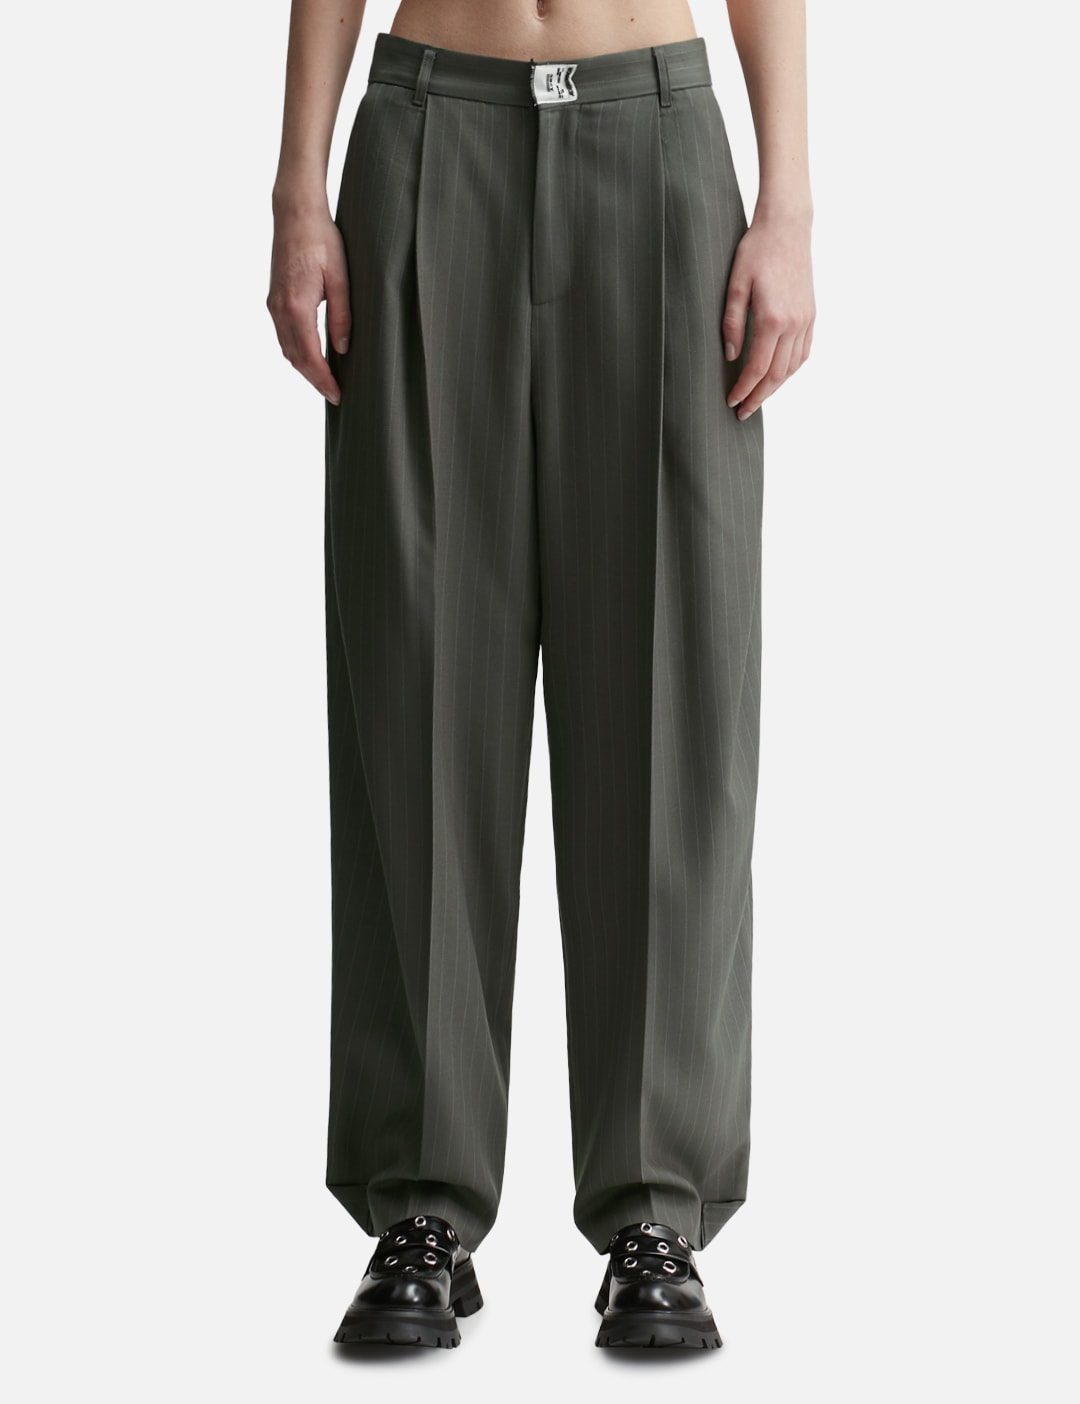 Hyein Seo - LOW-RISE PANTS  HBX - Globally Curated Fashion